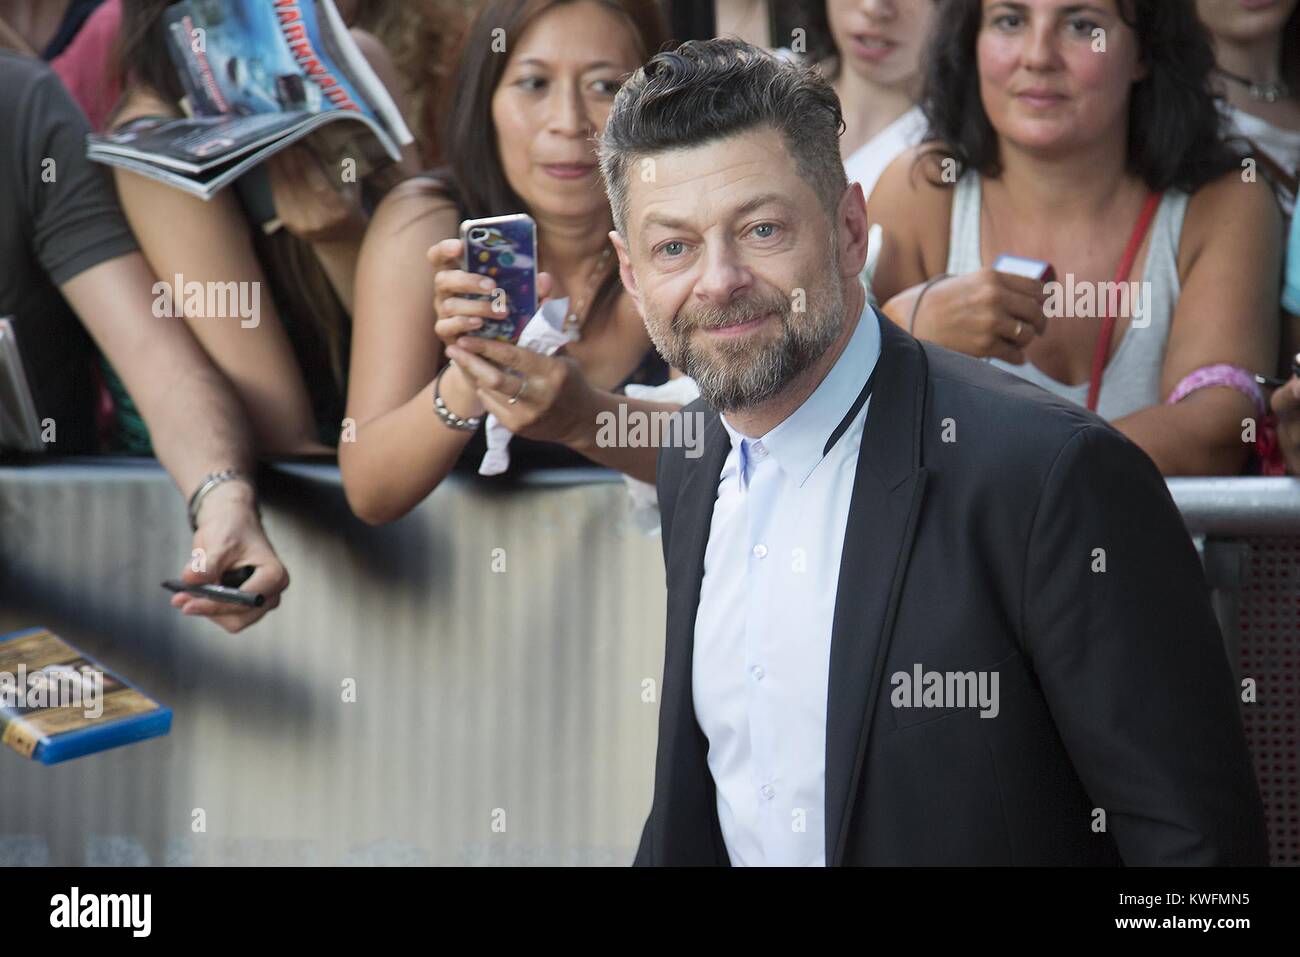 MADRID, SPAIN - JULY 16: Andy Serkis attends the 'Dawn of the Planet of the Apes' (El Amanecer del Planeta de los Simios) premiere on July 16, 2014 in Madrid, Spain  People:  Andy Serkis Stock Photo